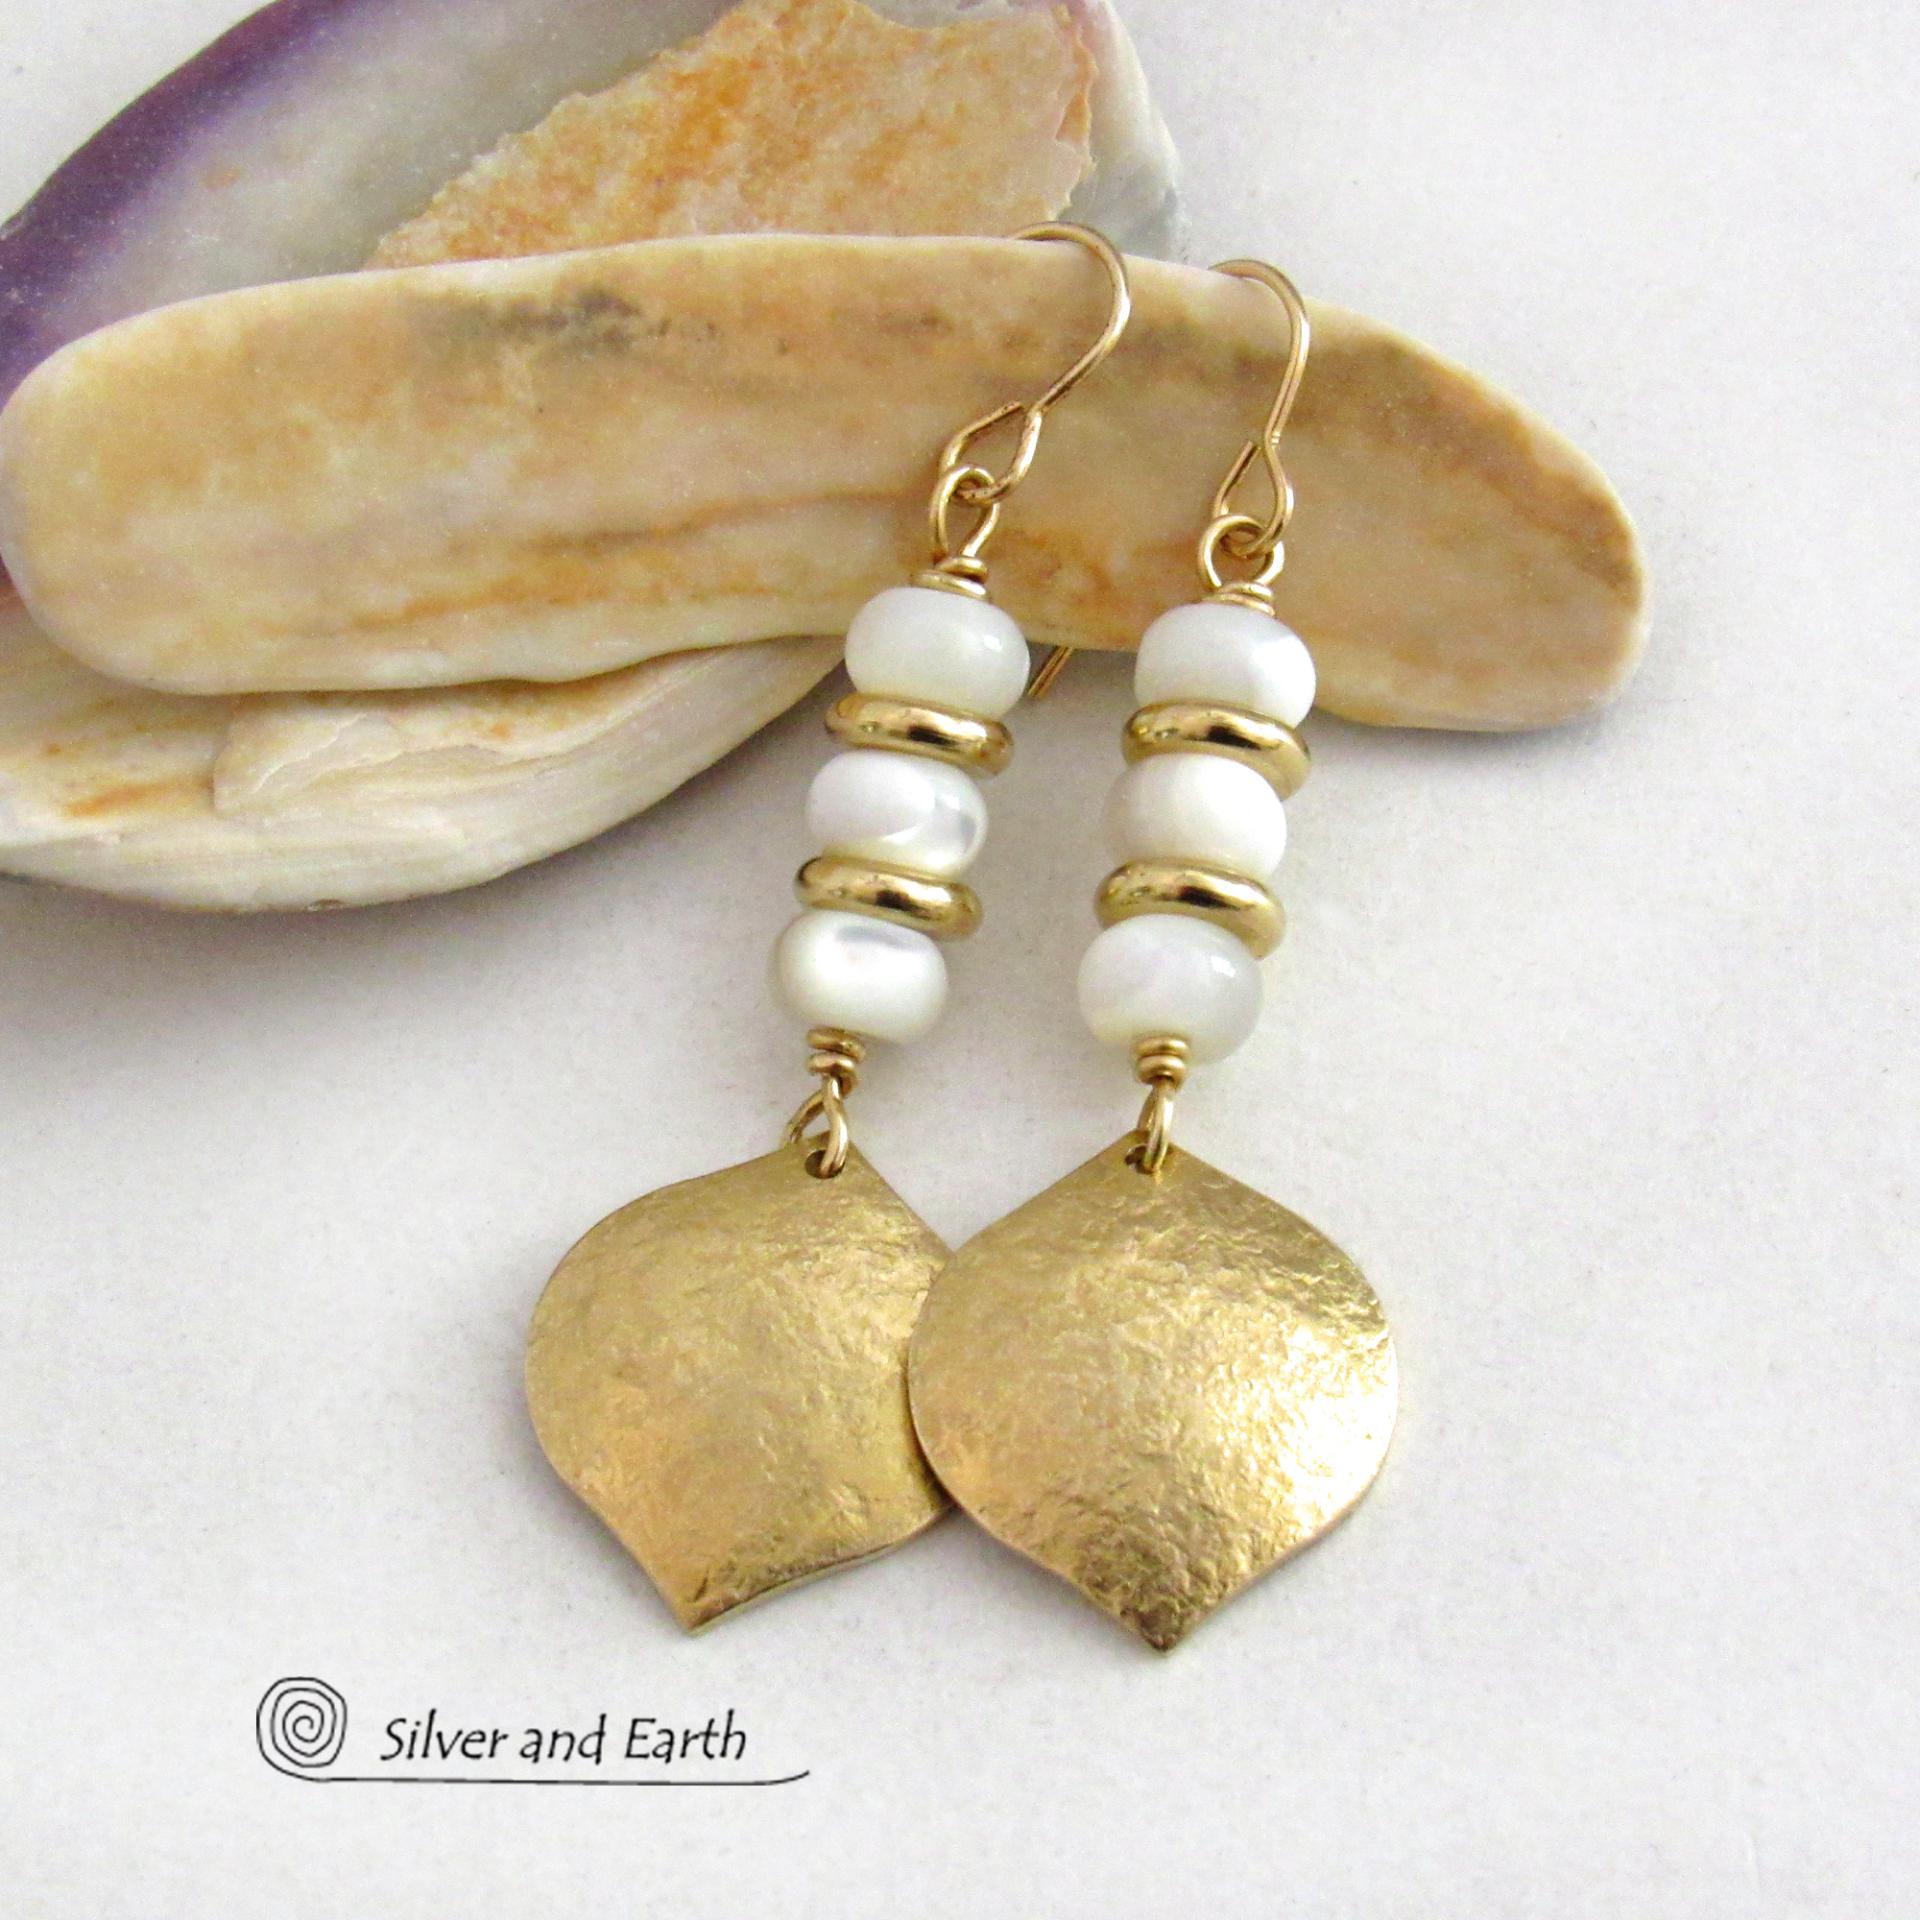 White Mother of Pearl Earrings with Shiny Gold Brass Dangles - Elegant Modern Chic Anniversary and Birthstone Jewelry